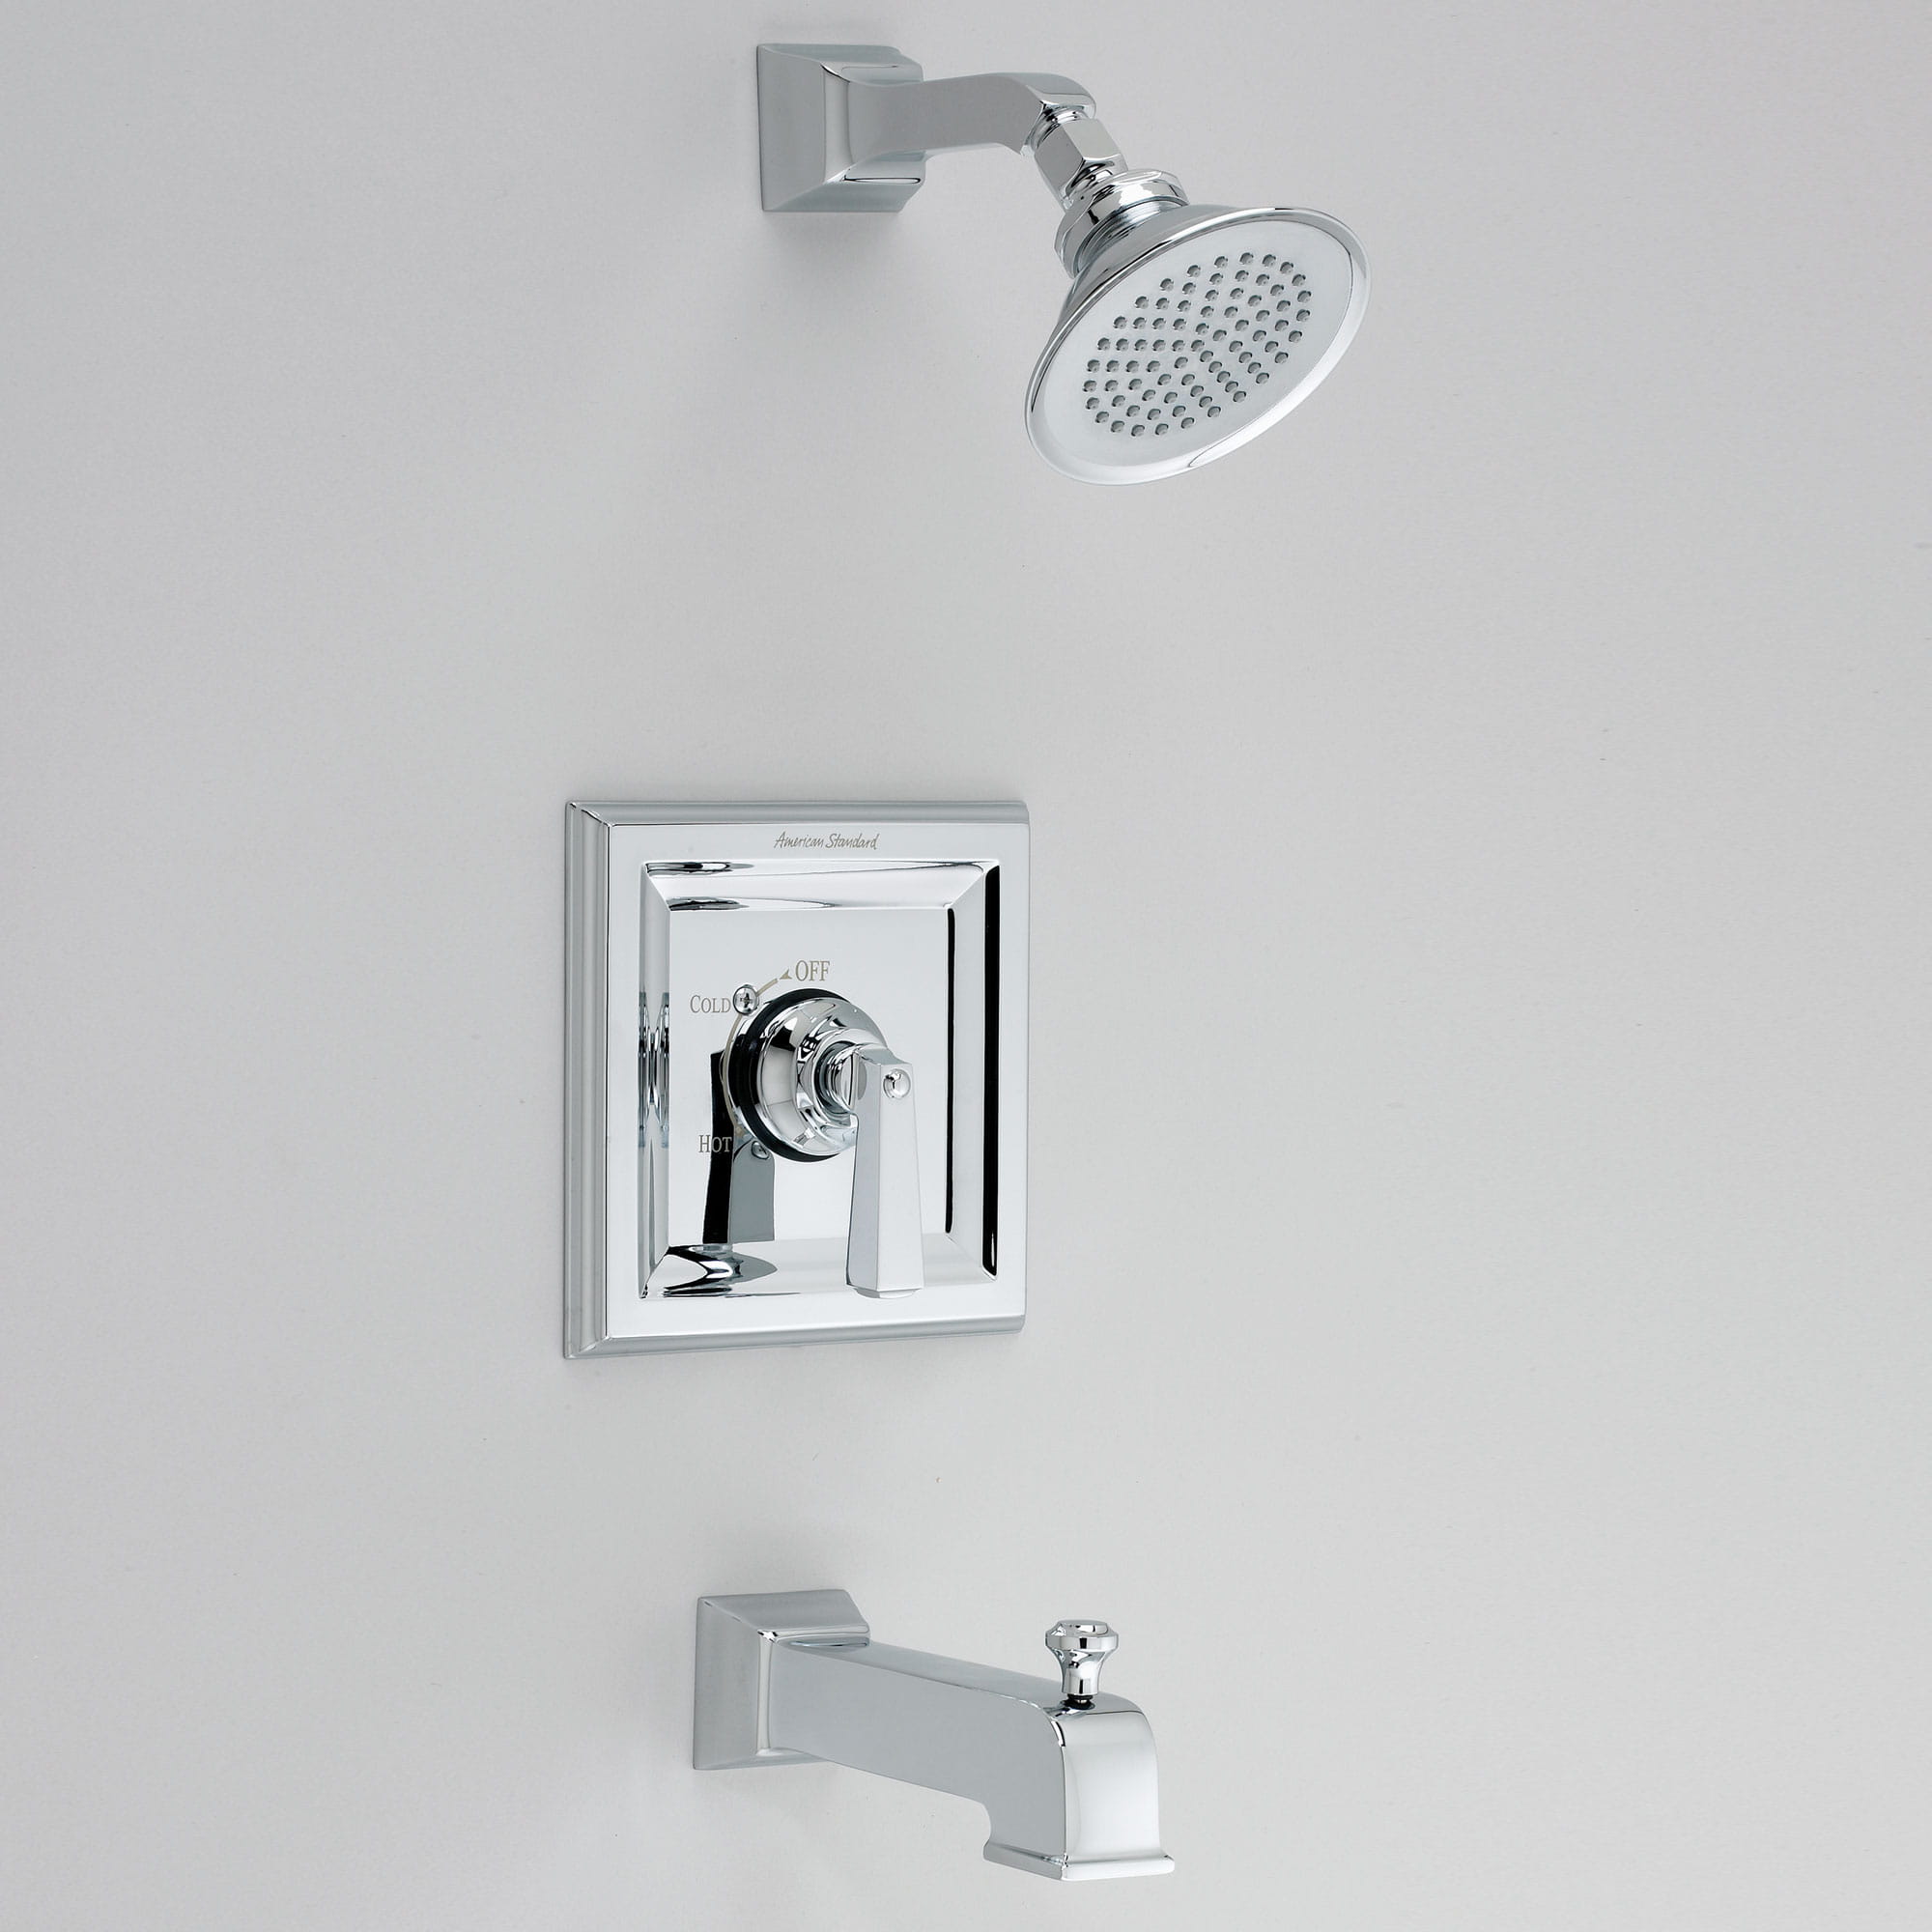 Town Square 25 GPM Tub and Shower Trim Kit with Rain Showerhead and Lever Handle CHROME